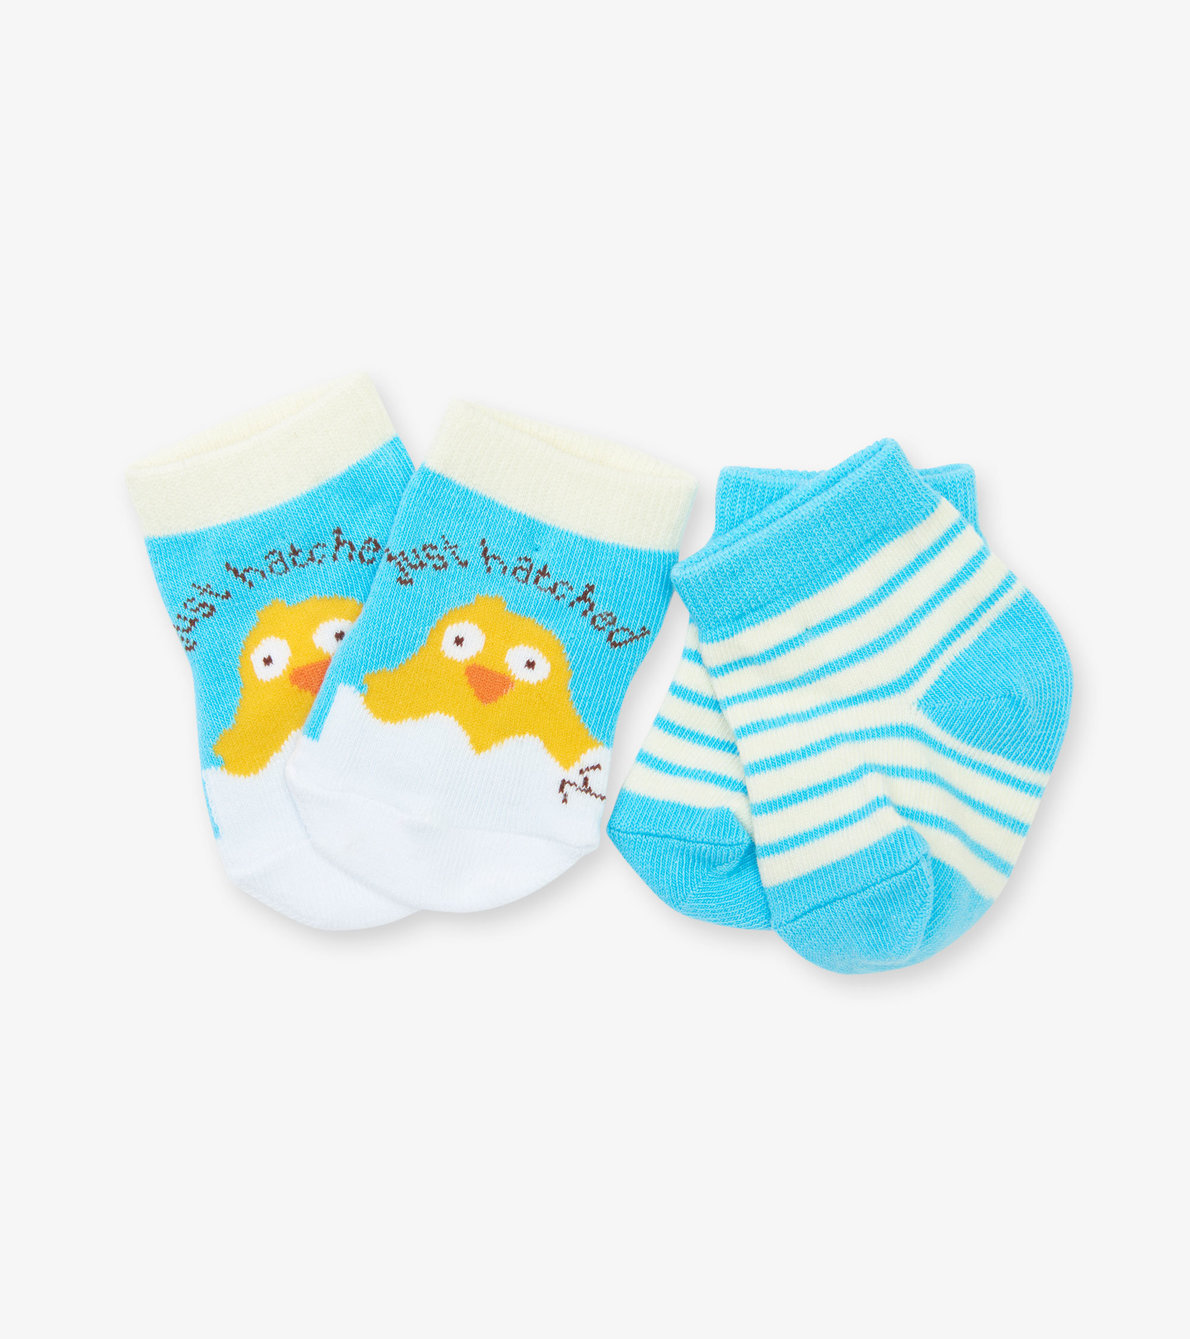 View larger image of Just Hatched 2-Pack Baby Socks